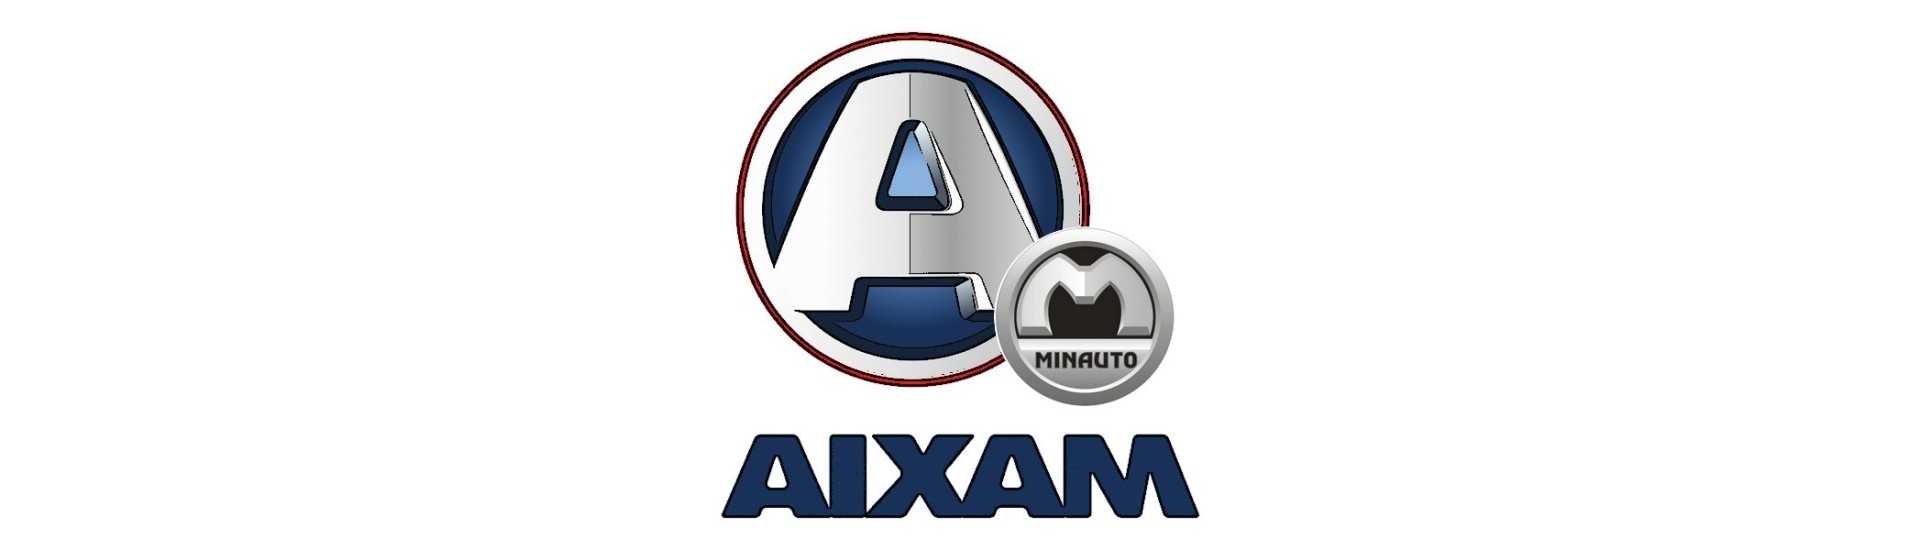 Klaxon at the best price for car without a permit Aixam Minauto